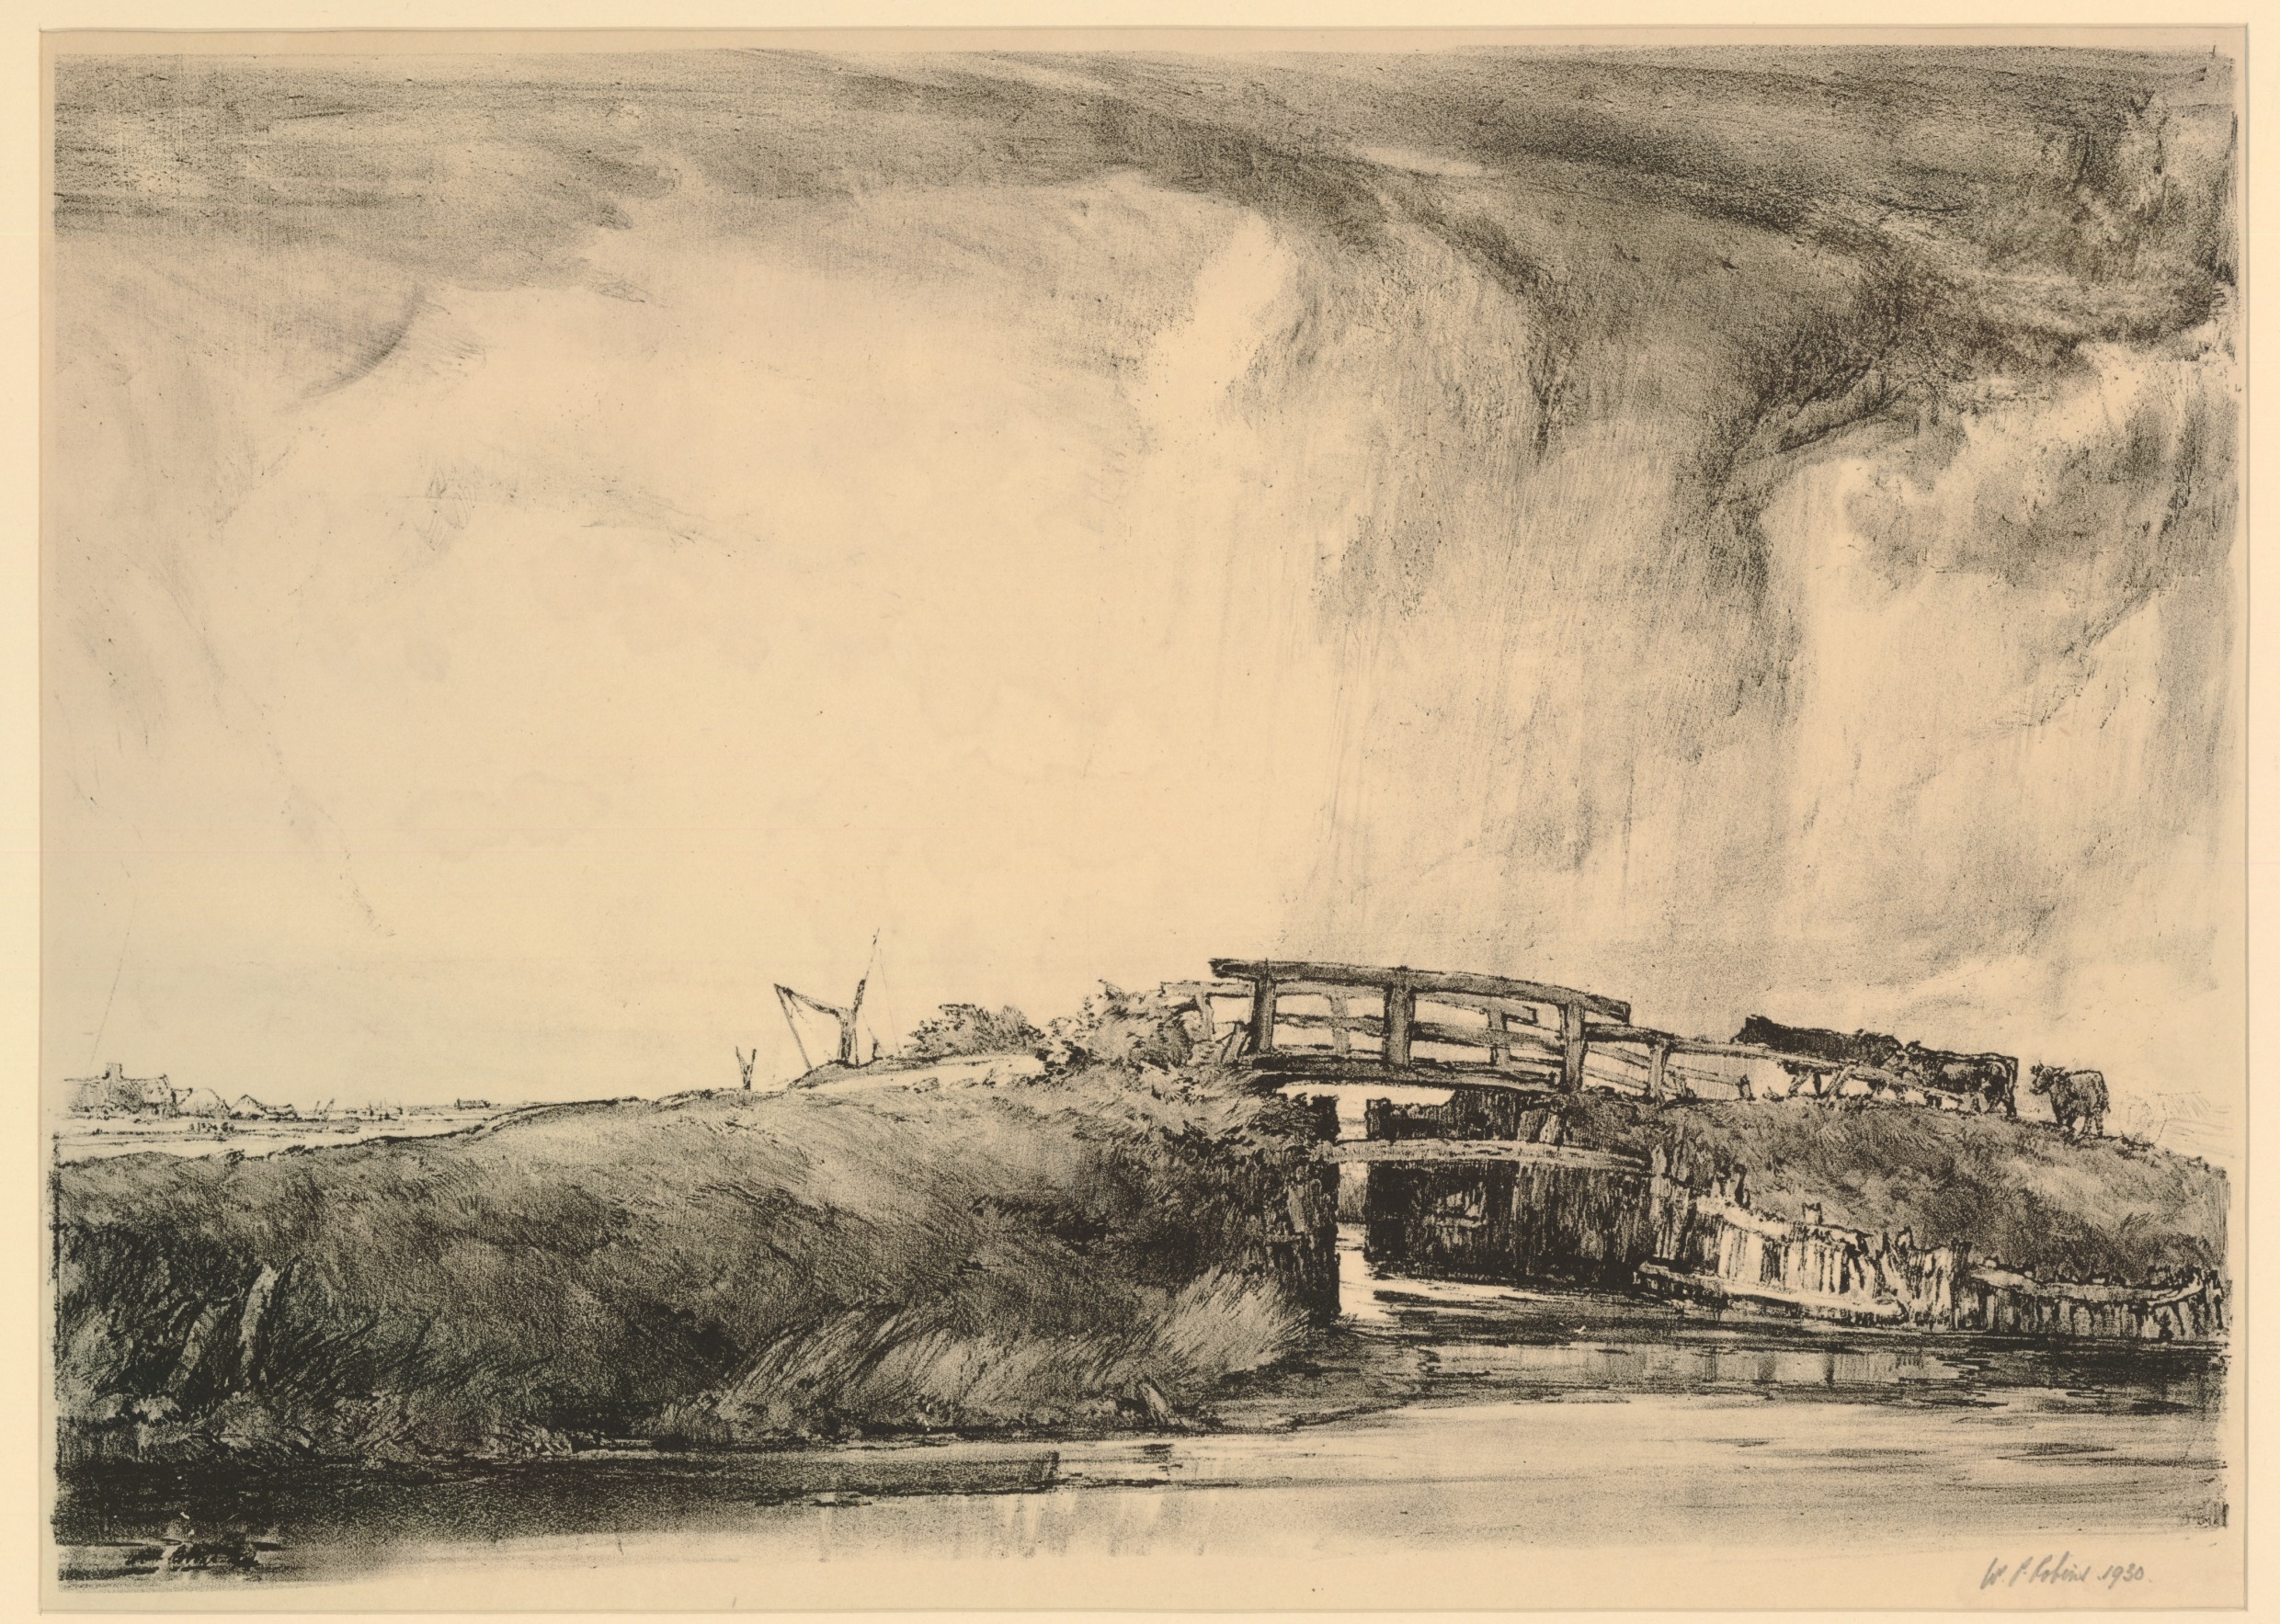 Landscape with cattle crossing bridge over river (1930)